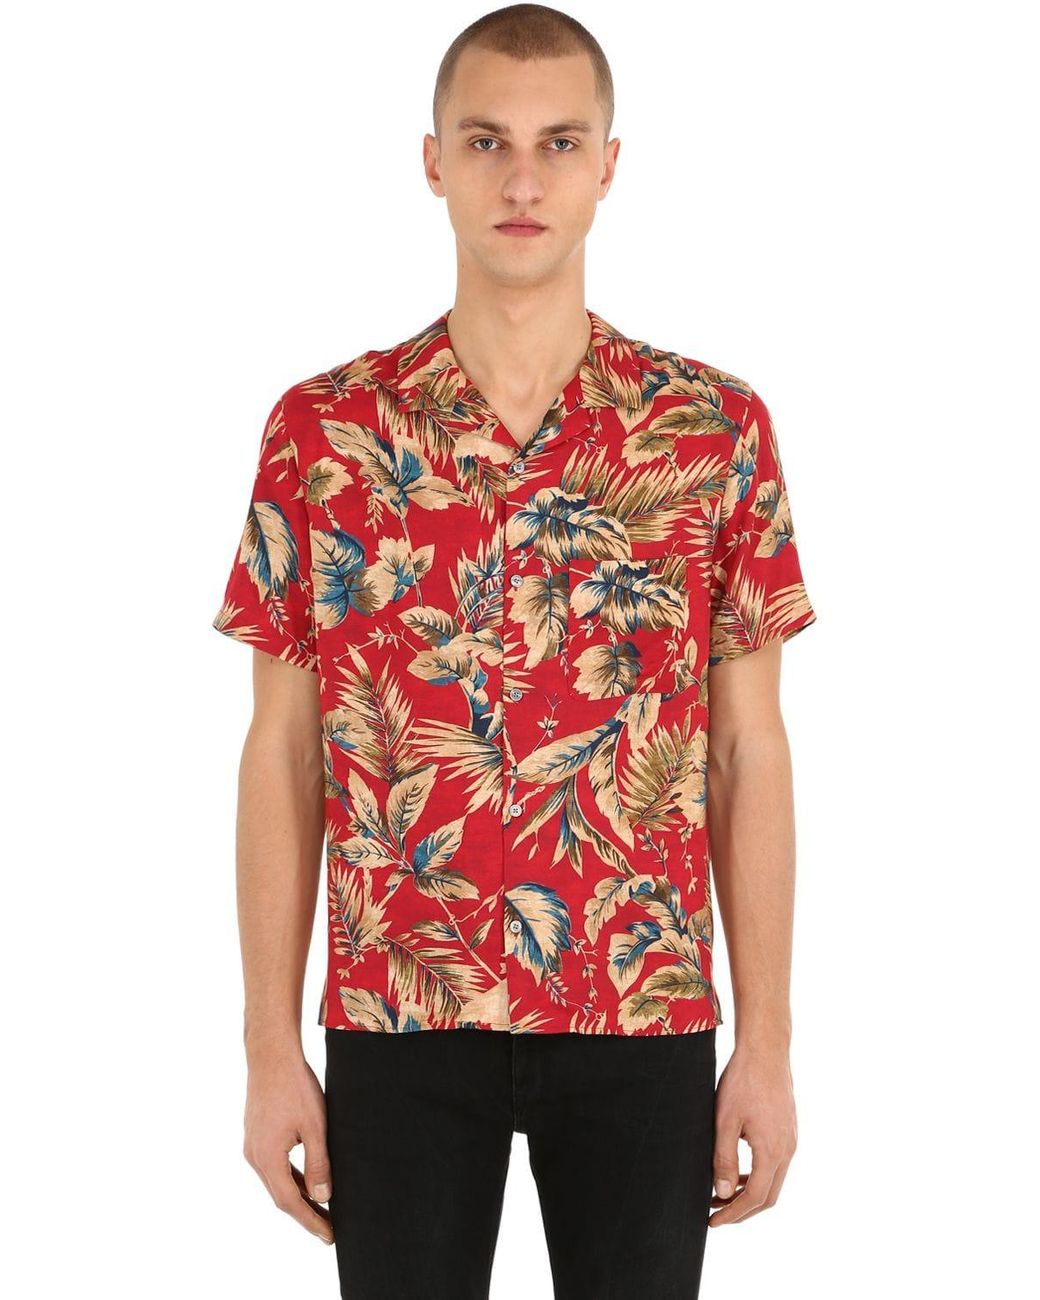 The Kooples Synthetic Hawaiian Printed Viscose Shirt in Red for Men - Lyst